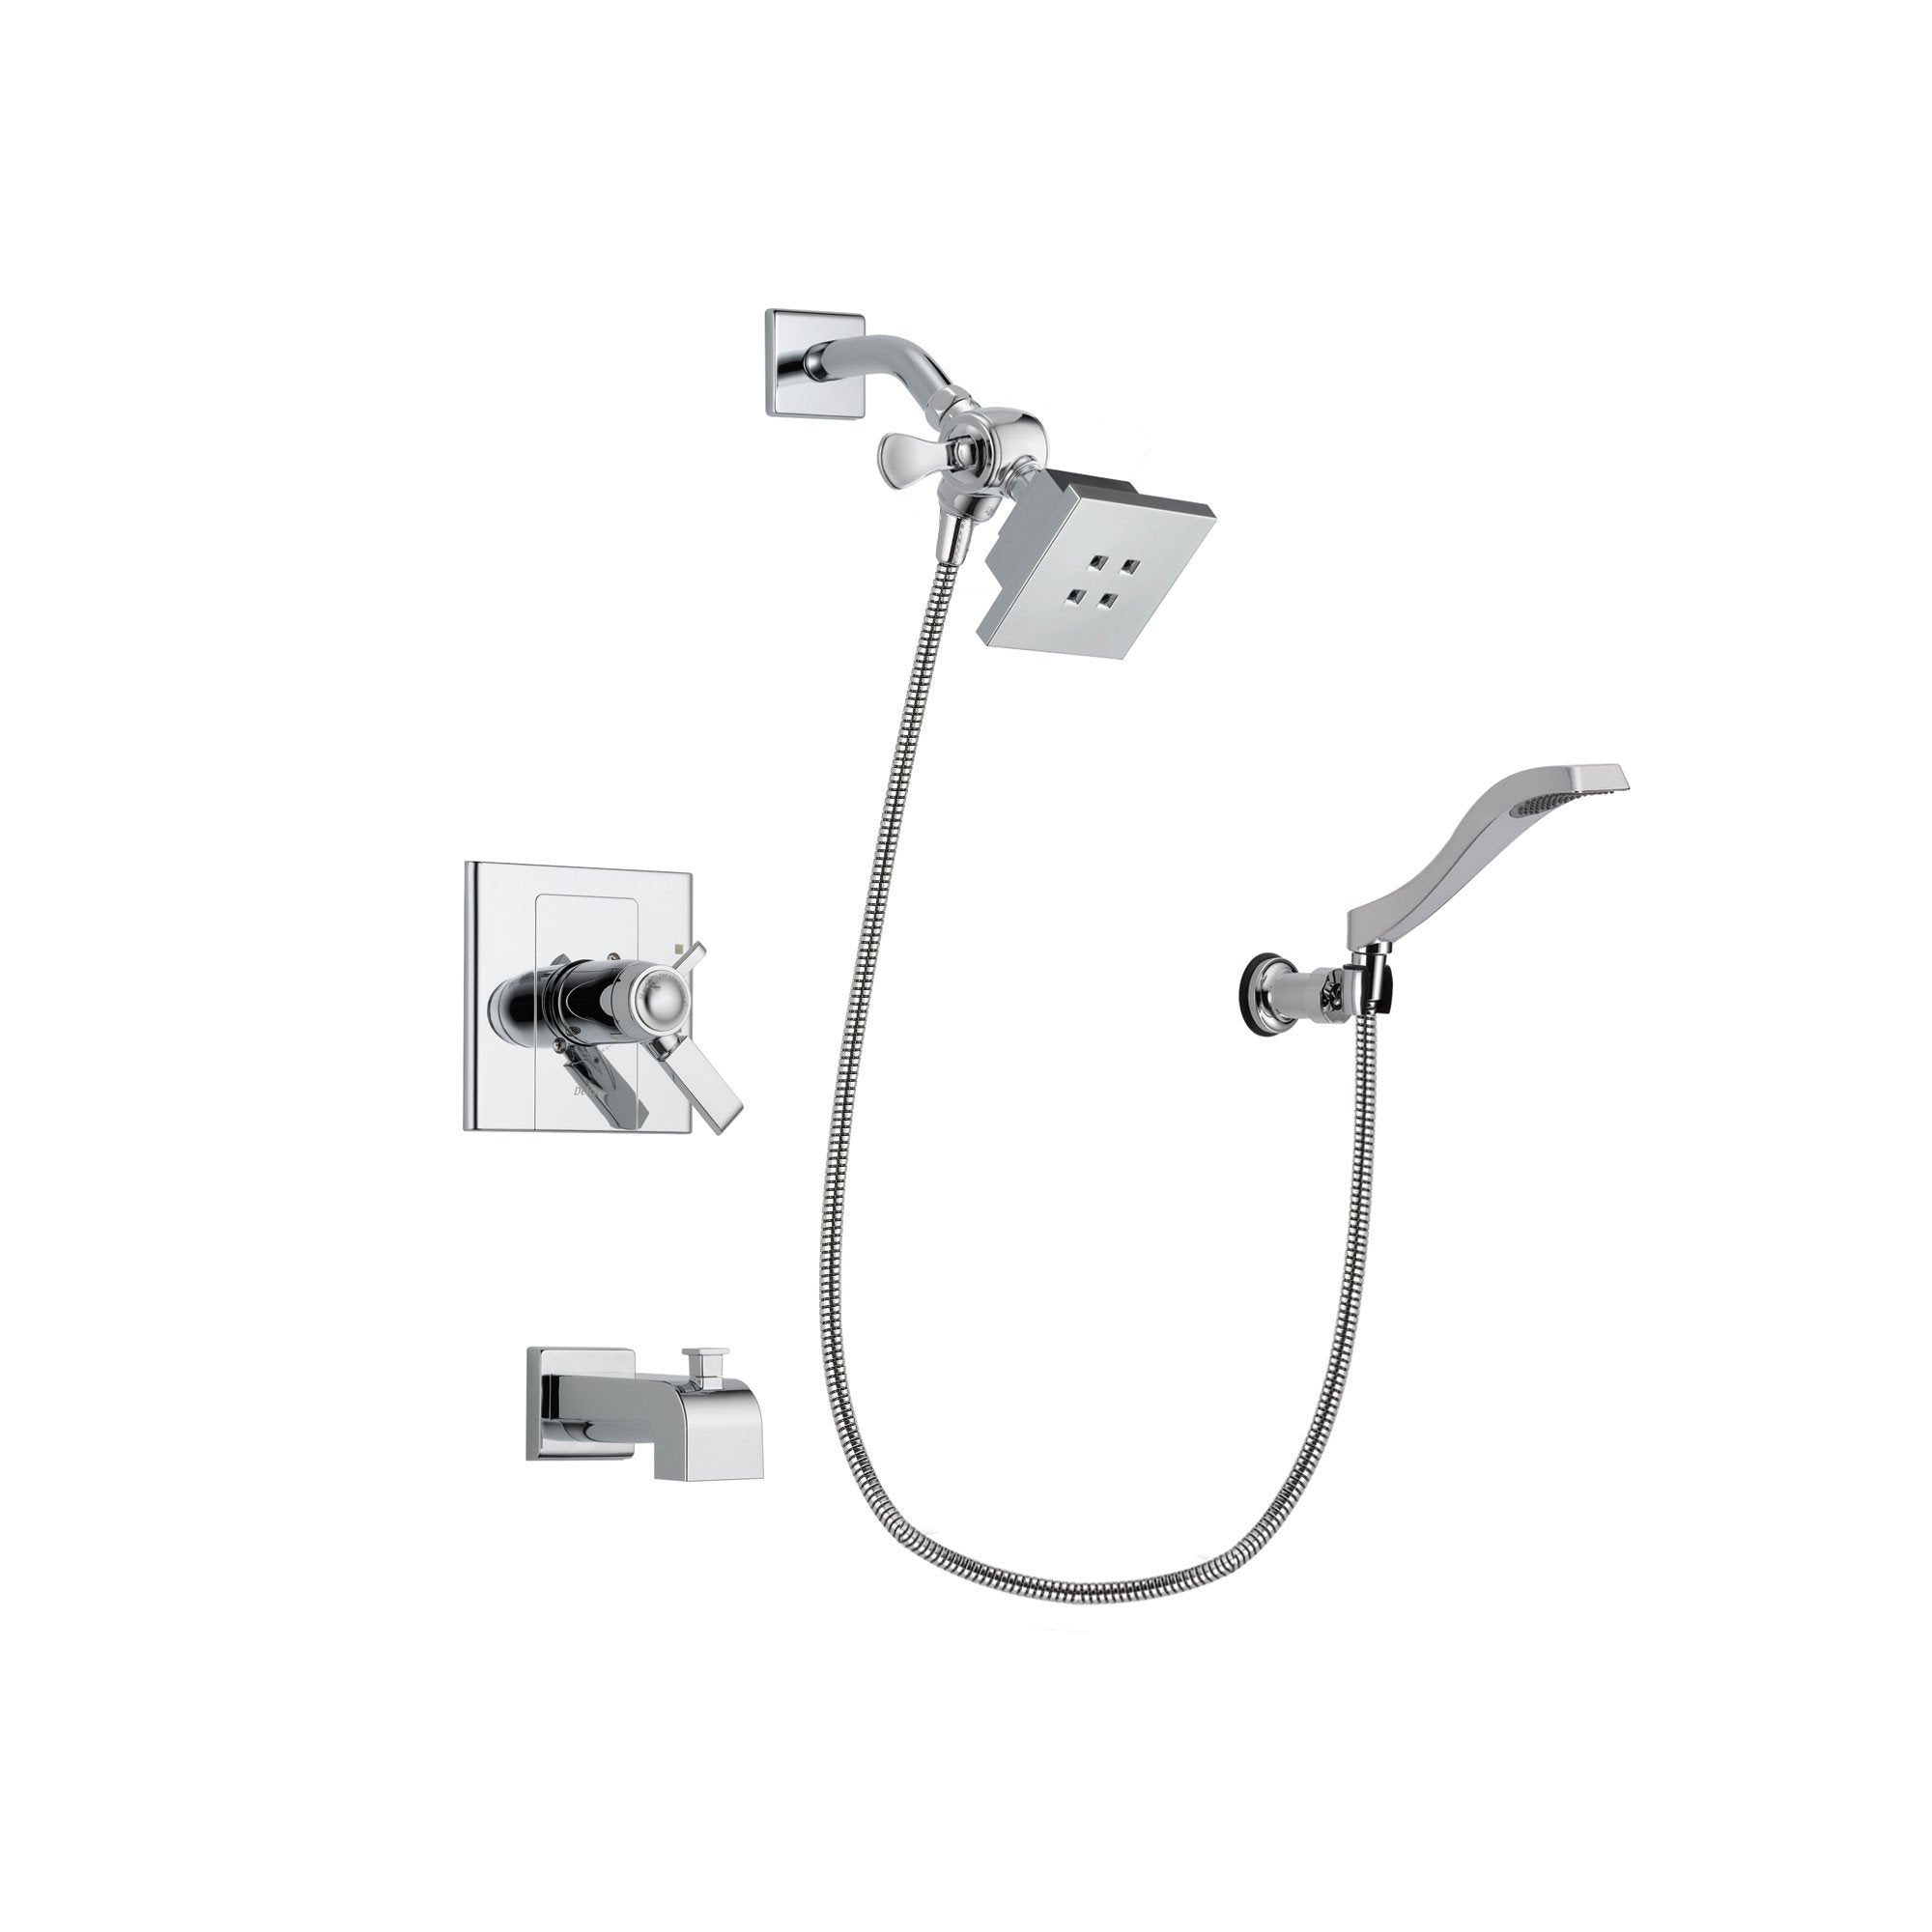 Delta Arzo Chrome Finish Thermostatic Tub and Shower Faucet System Package with Square Showerhead and Modern Handheld Shower Spray with Wall Bracket and Hose Includes Rough-in Valve and Tub Spout DSP0006V